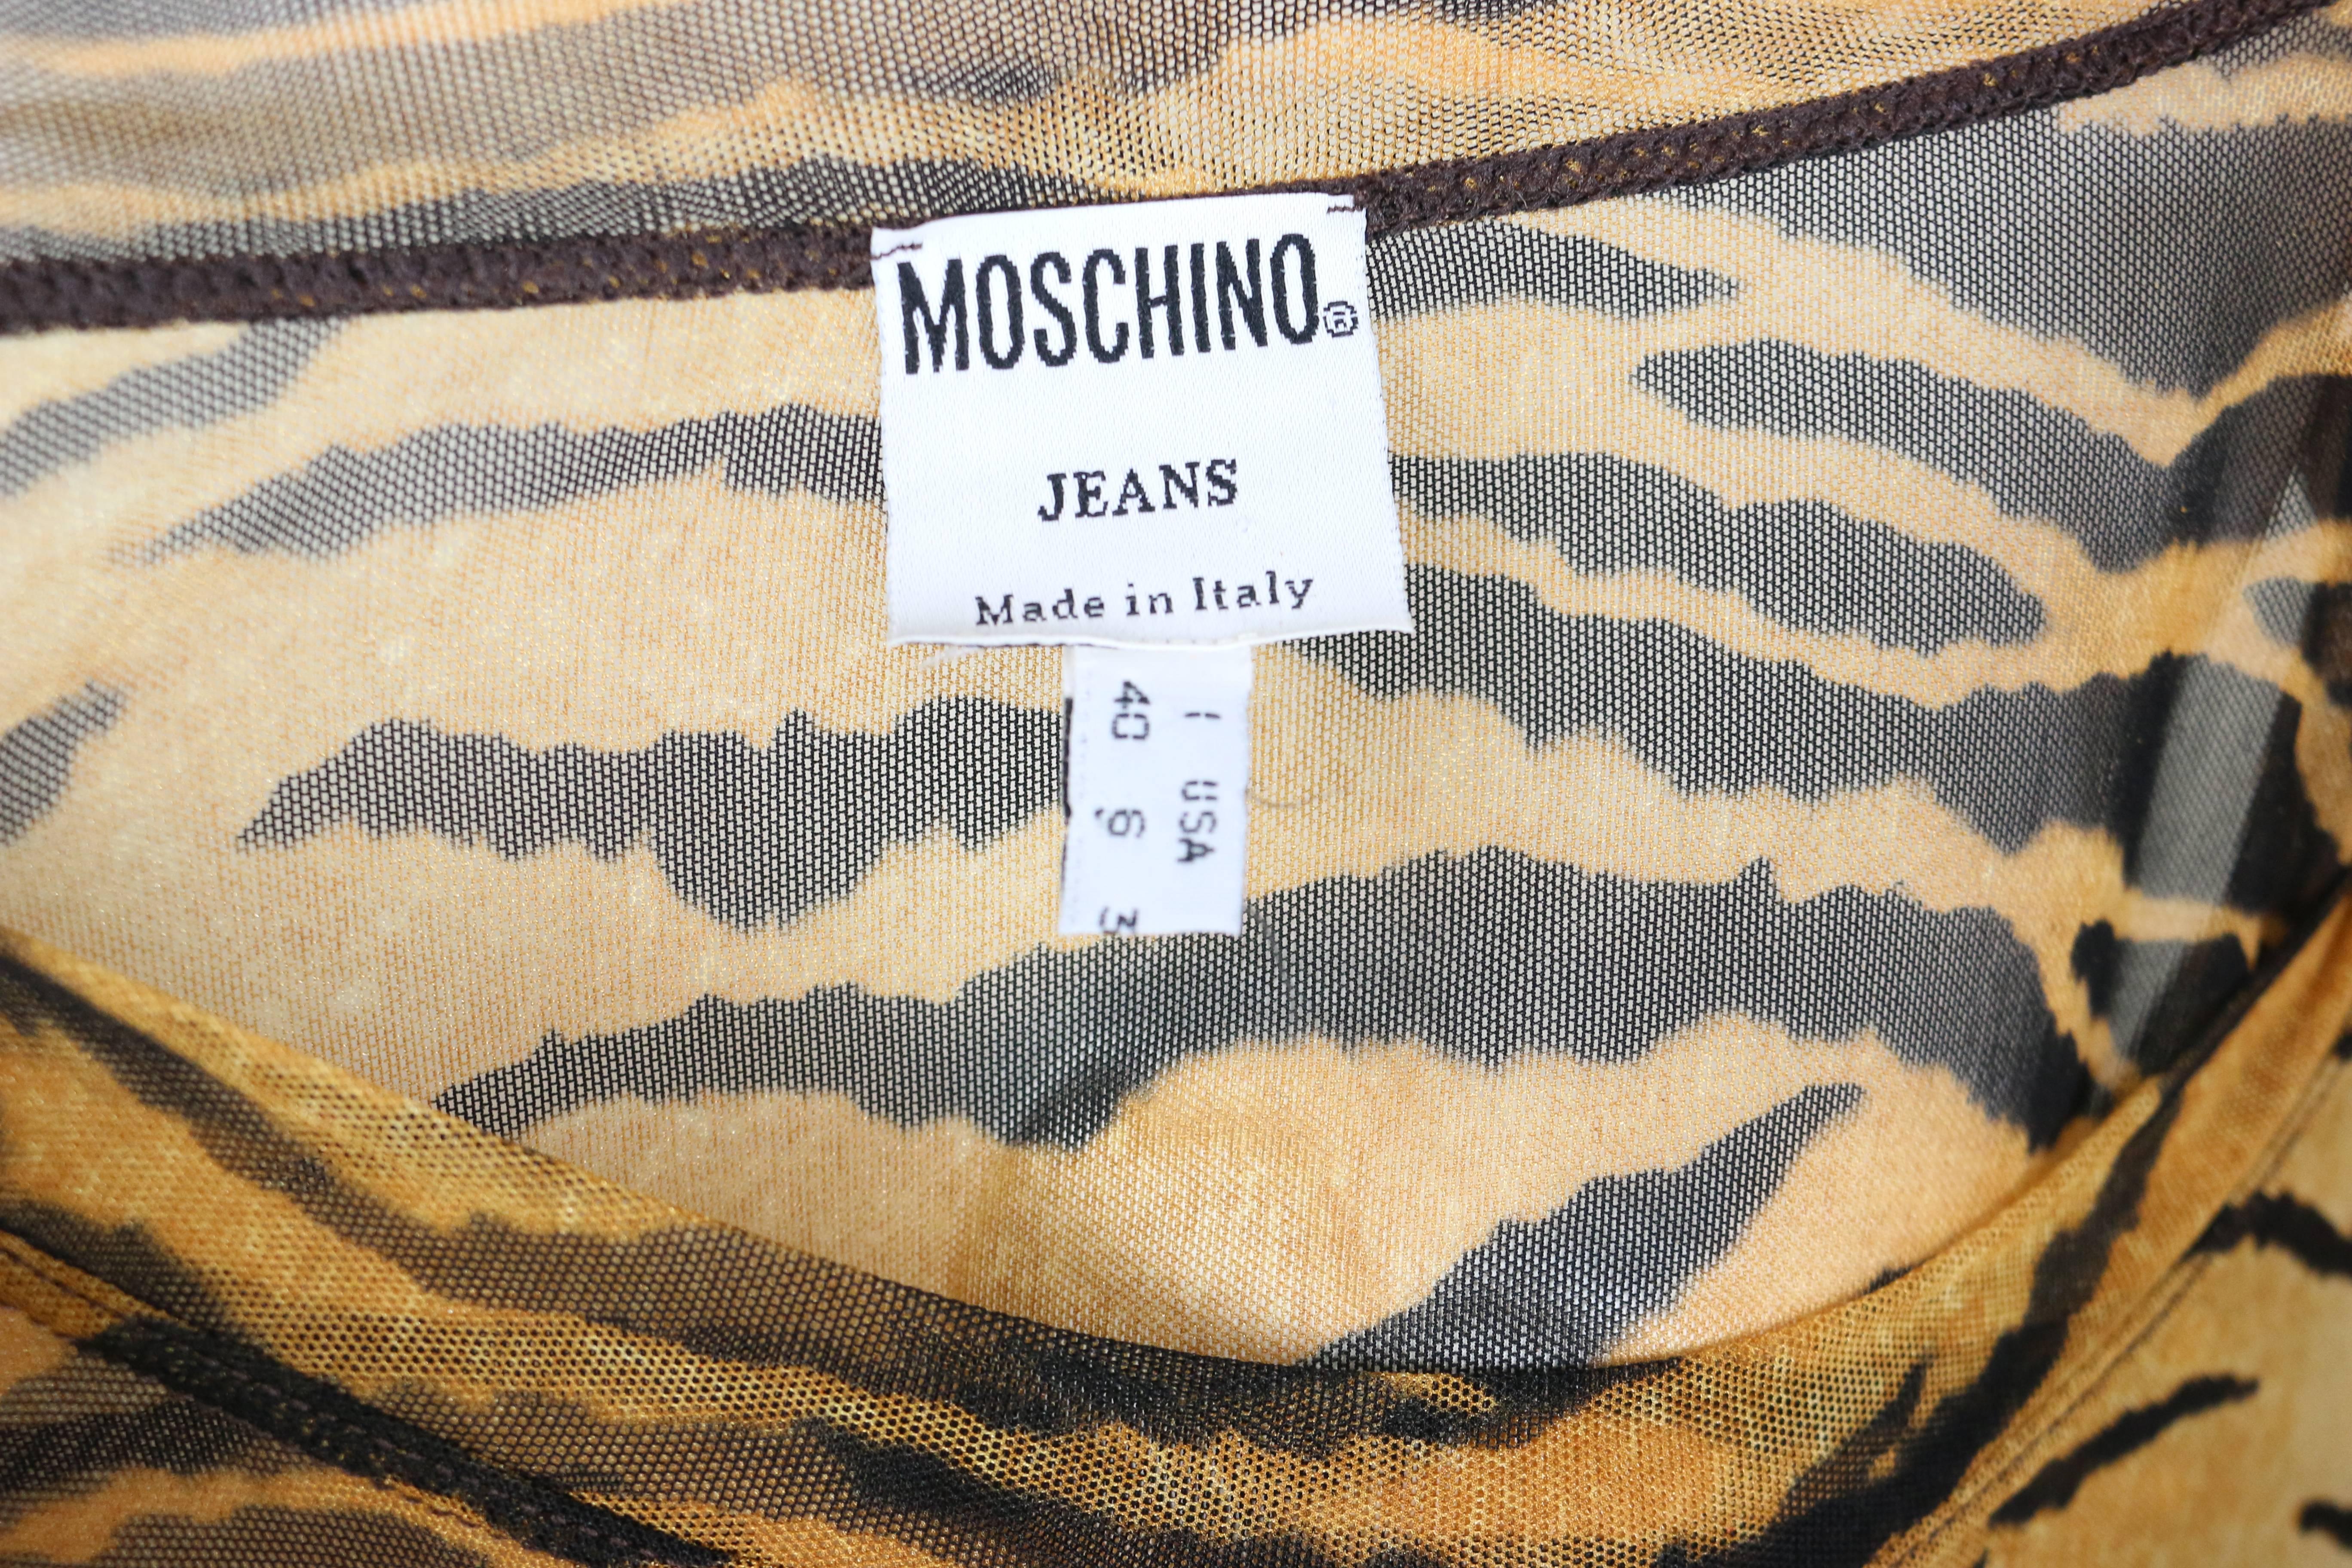 Beige Moschino Jeans Leopard Pattern Nylon See-Through Long Sleeves Top